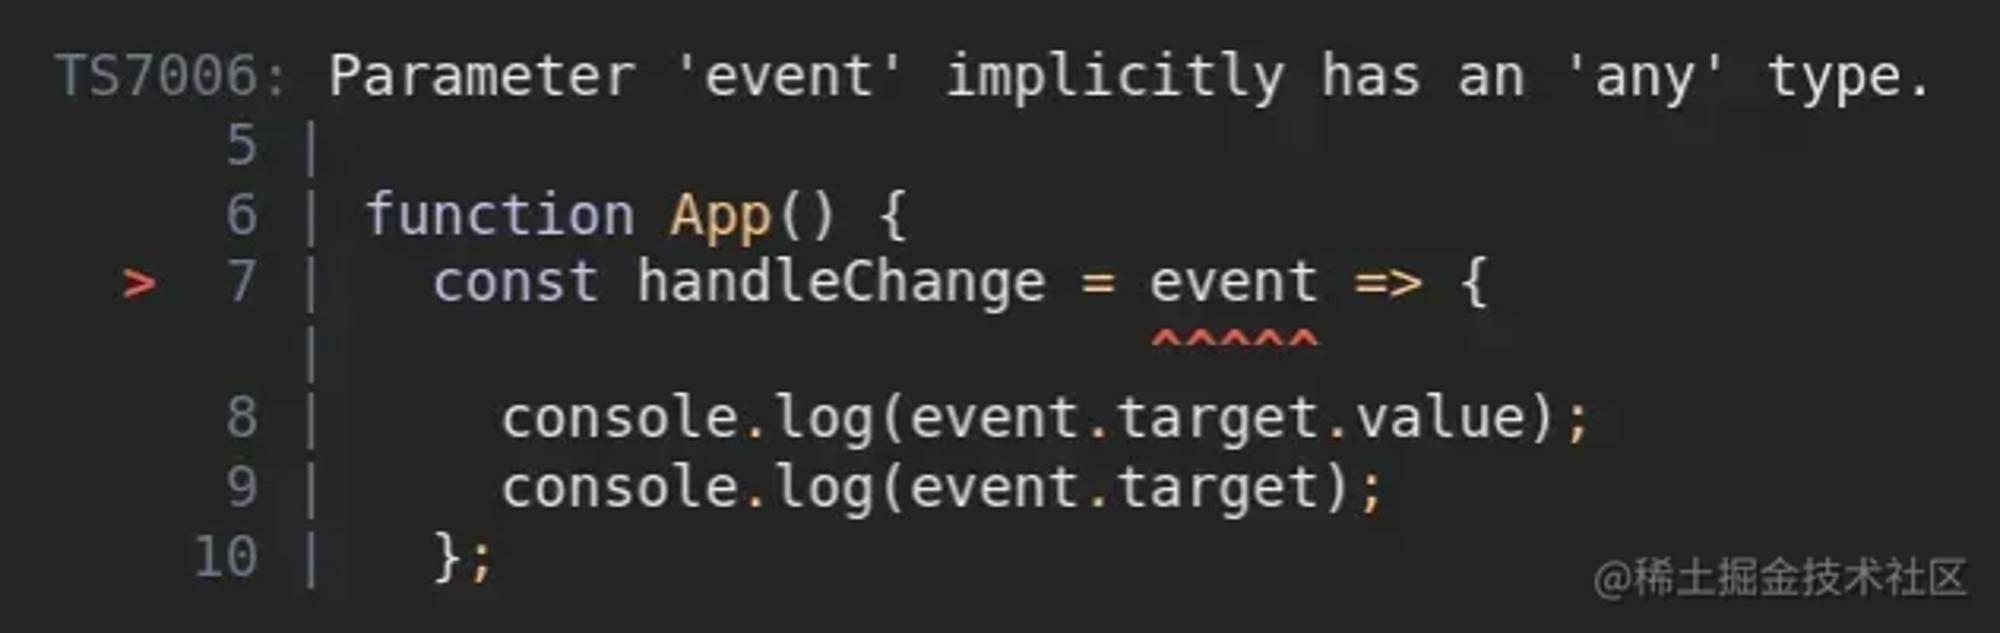 parameter-event-implicitly-has-any-type.png